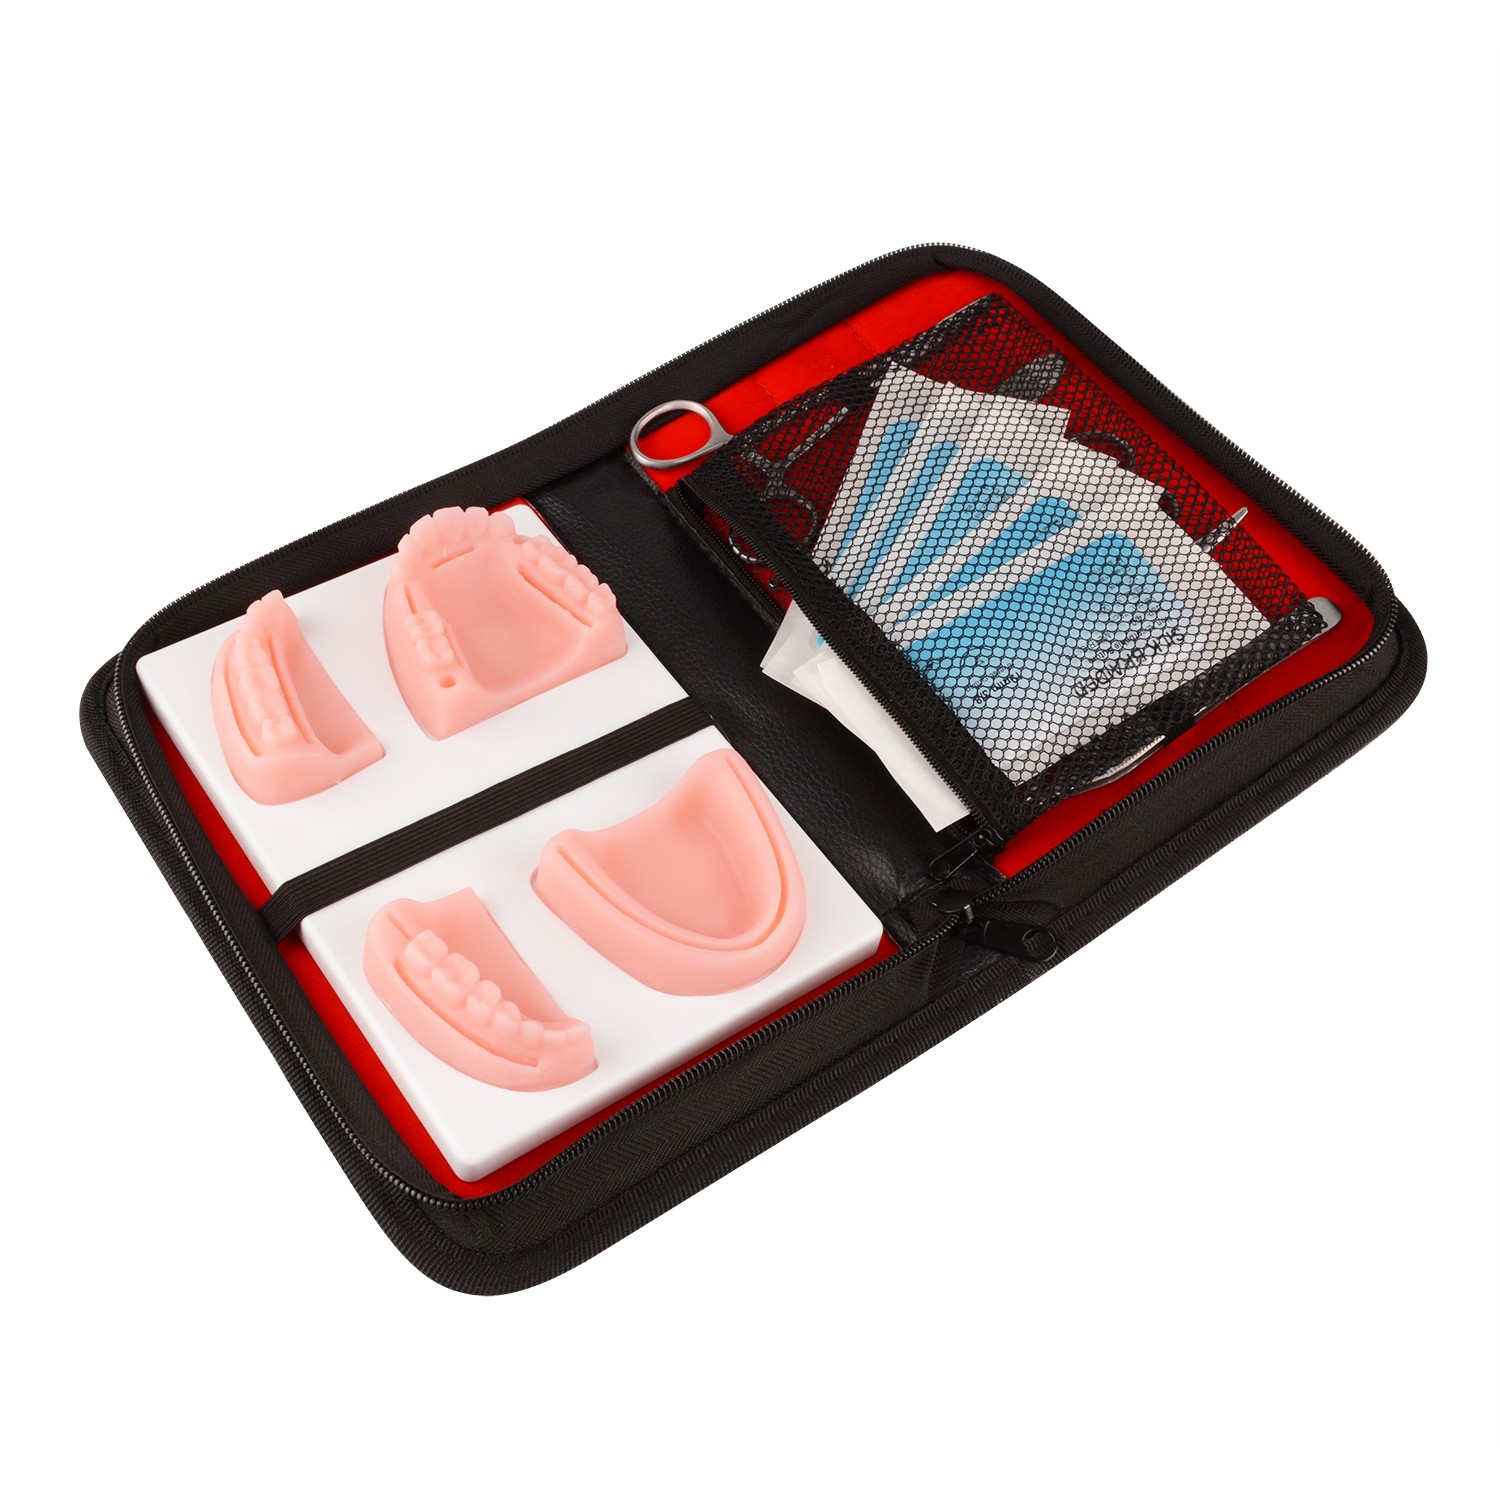 Complete Dental Student Practice Kit with Suture Pad and Instruments